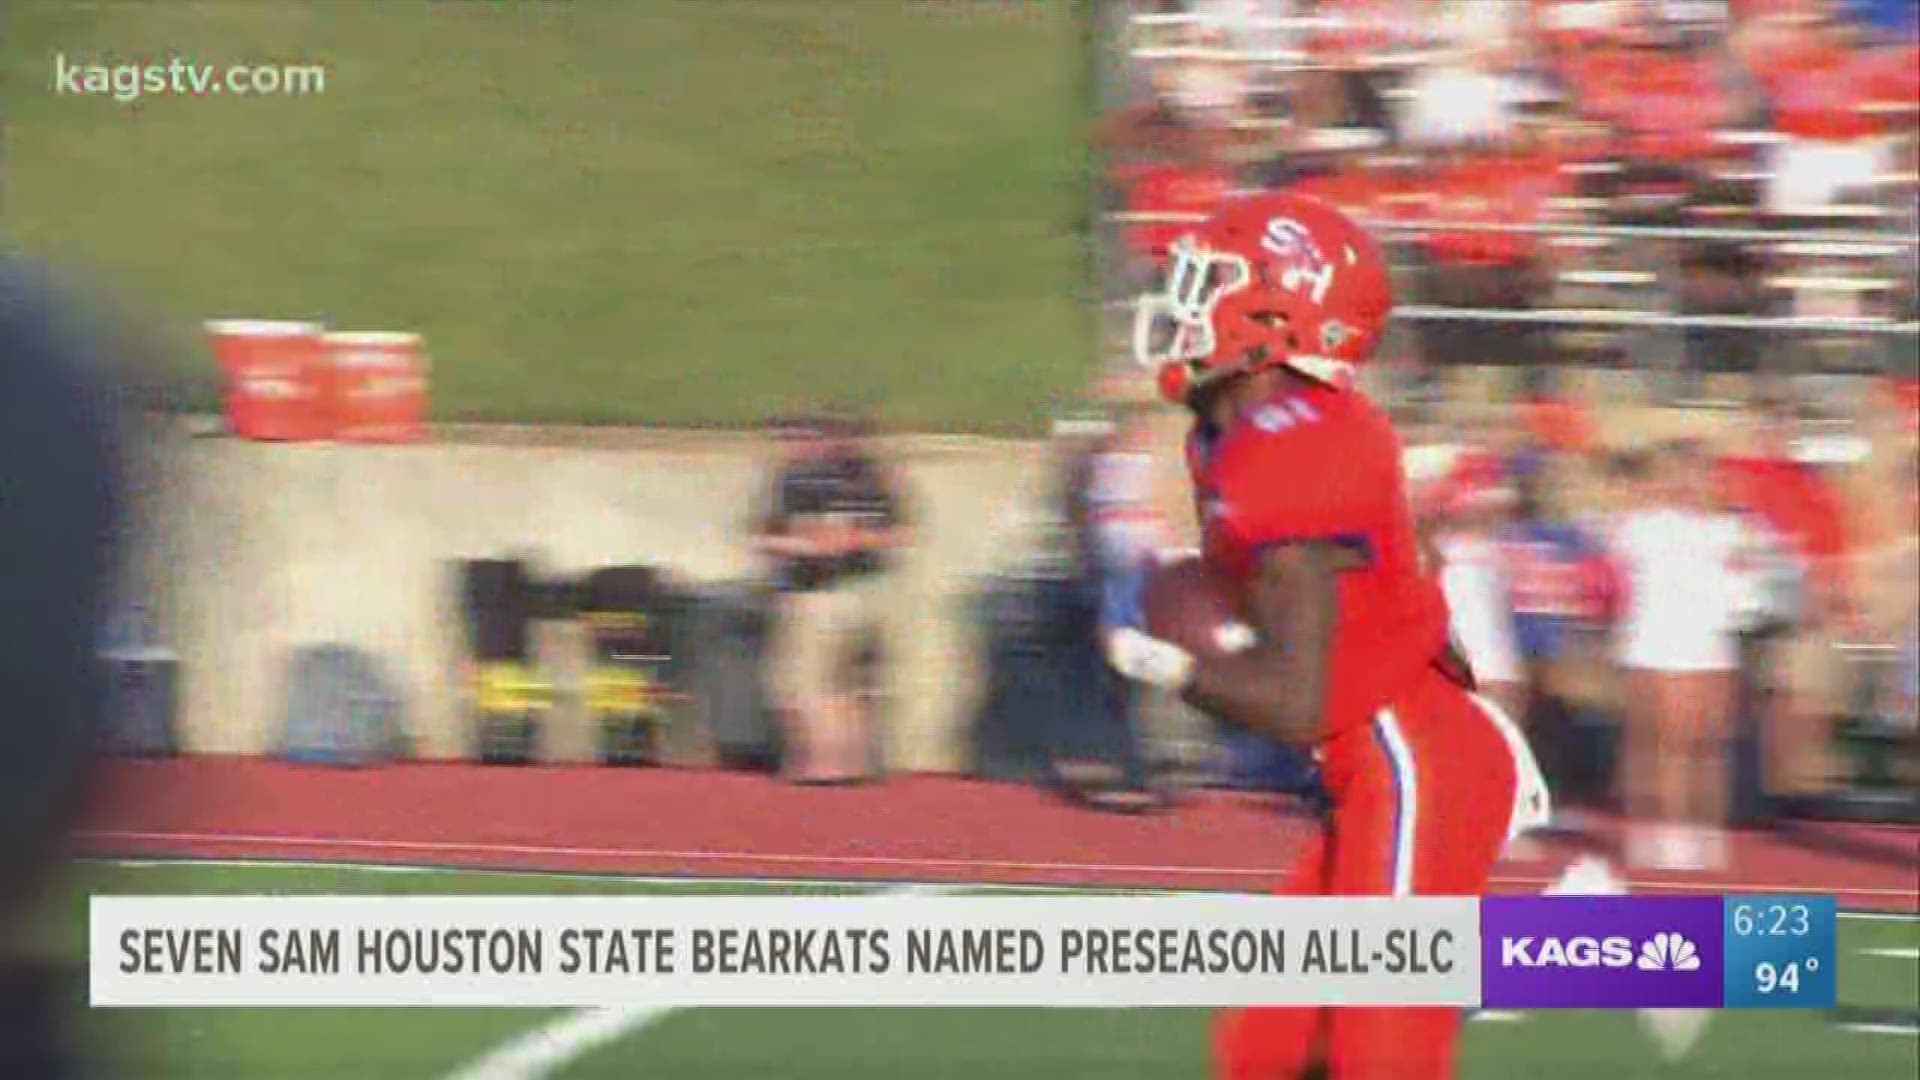 Seven Sam Houston State football players have been named to SLC preseason team.